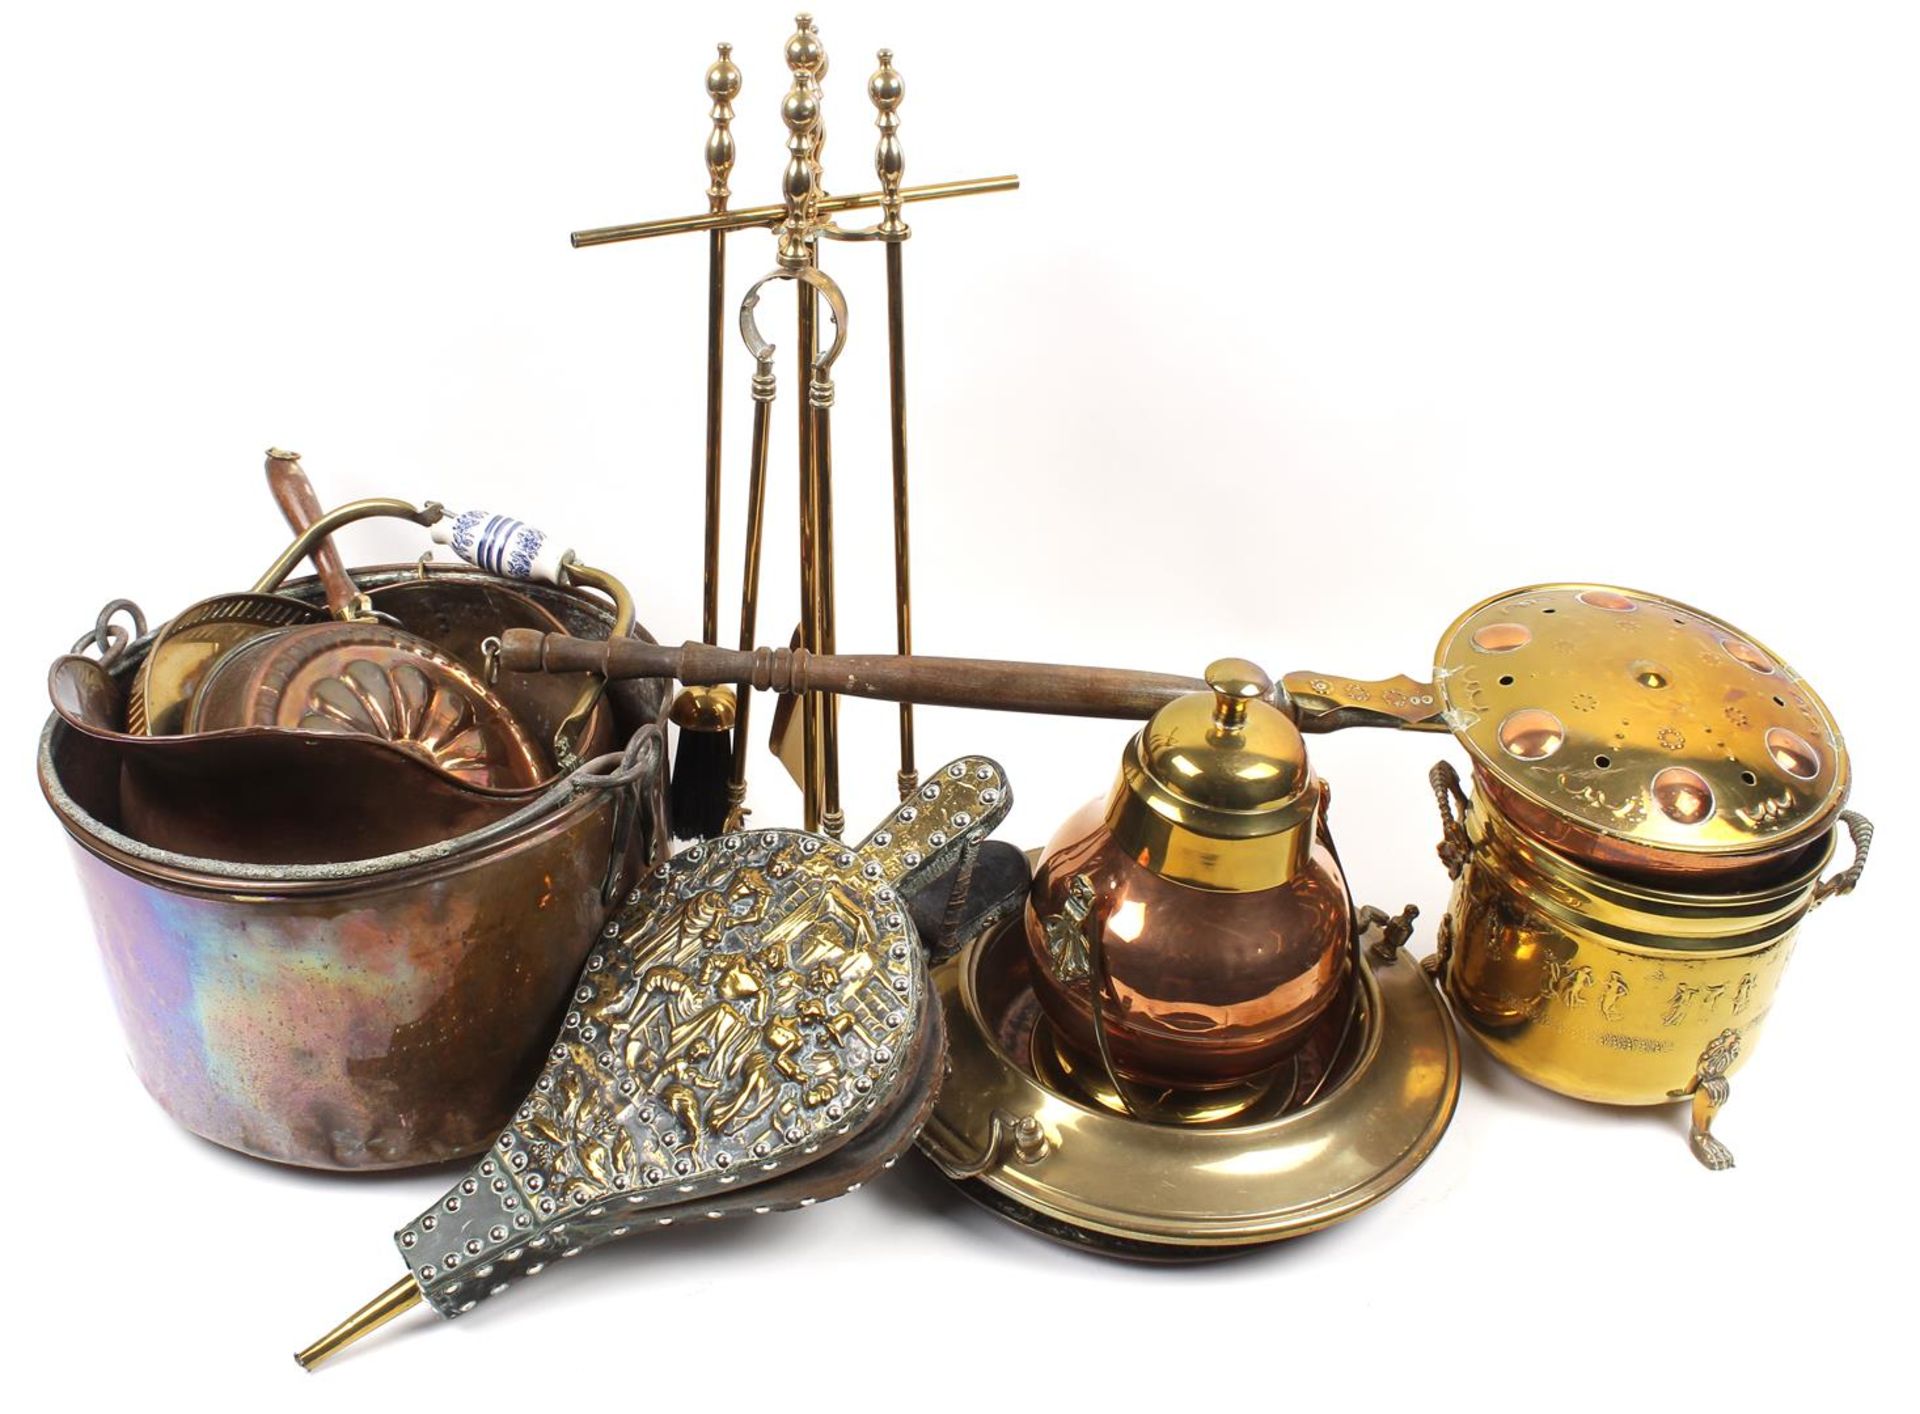 Lot with various brassware and bellows